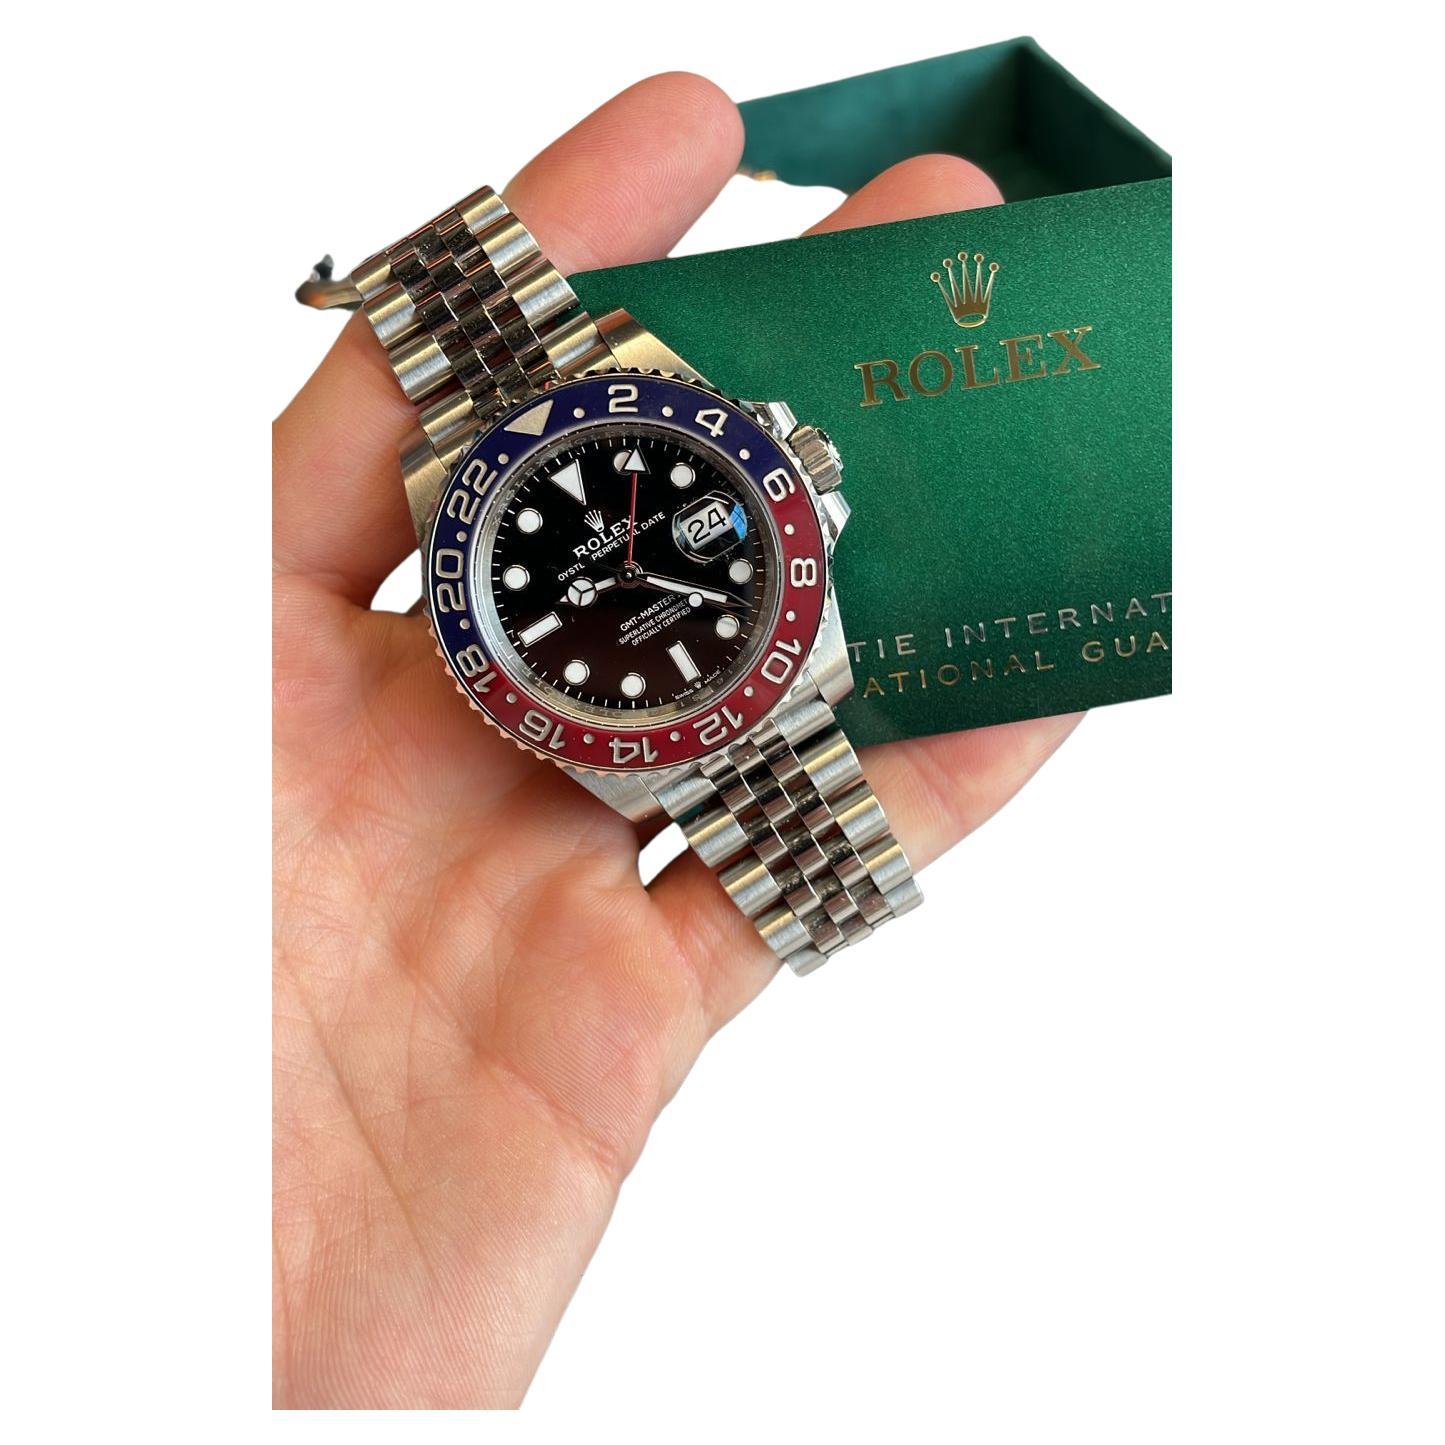 Rolex GMT Master II Pepsi Black Dial Stainless Steel Mens Watch 126710blro-0001 For Sale